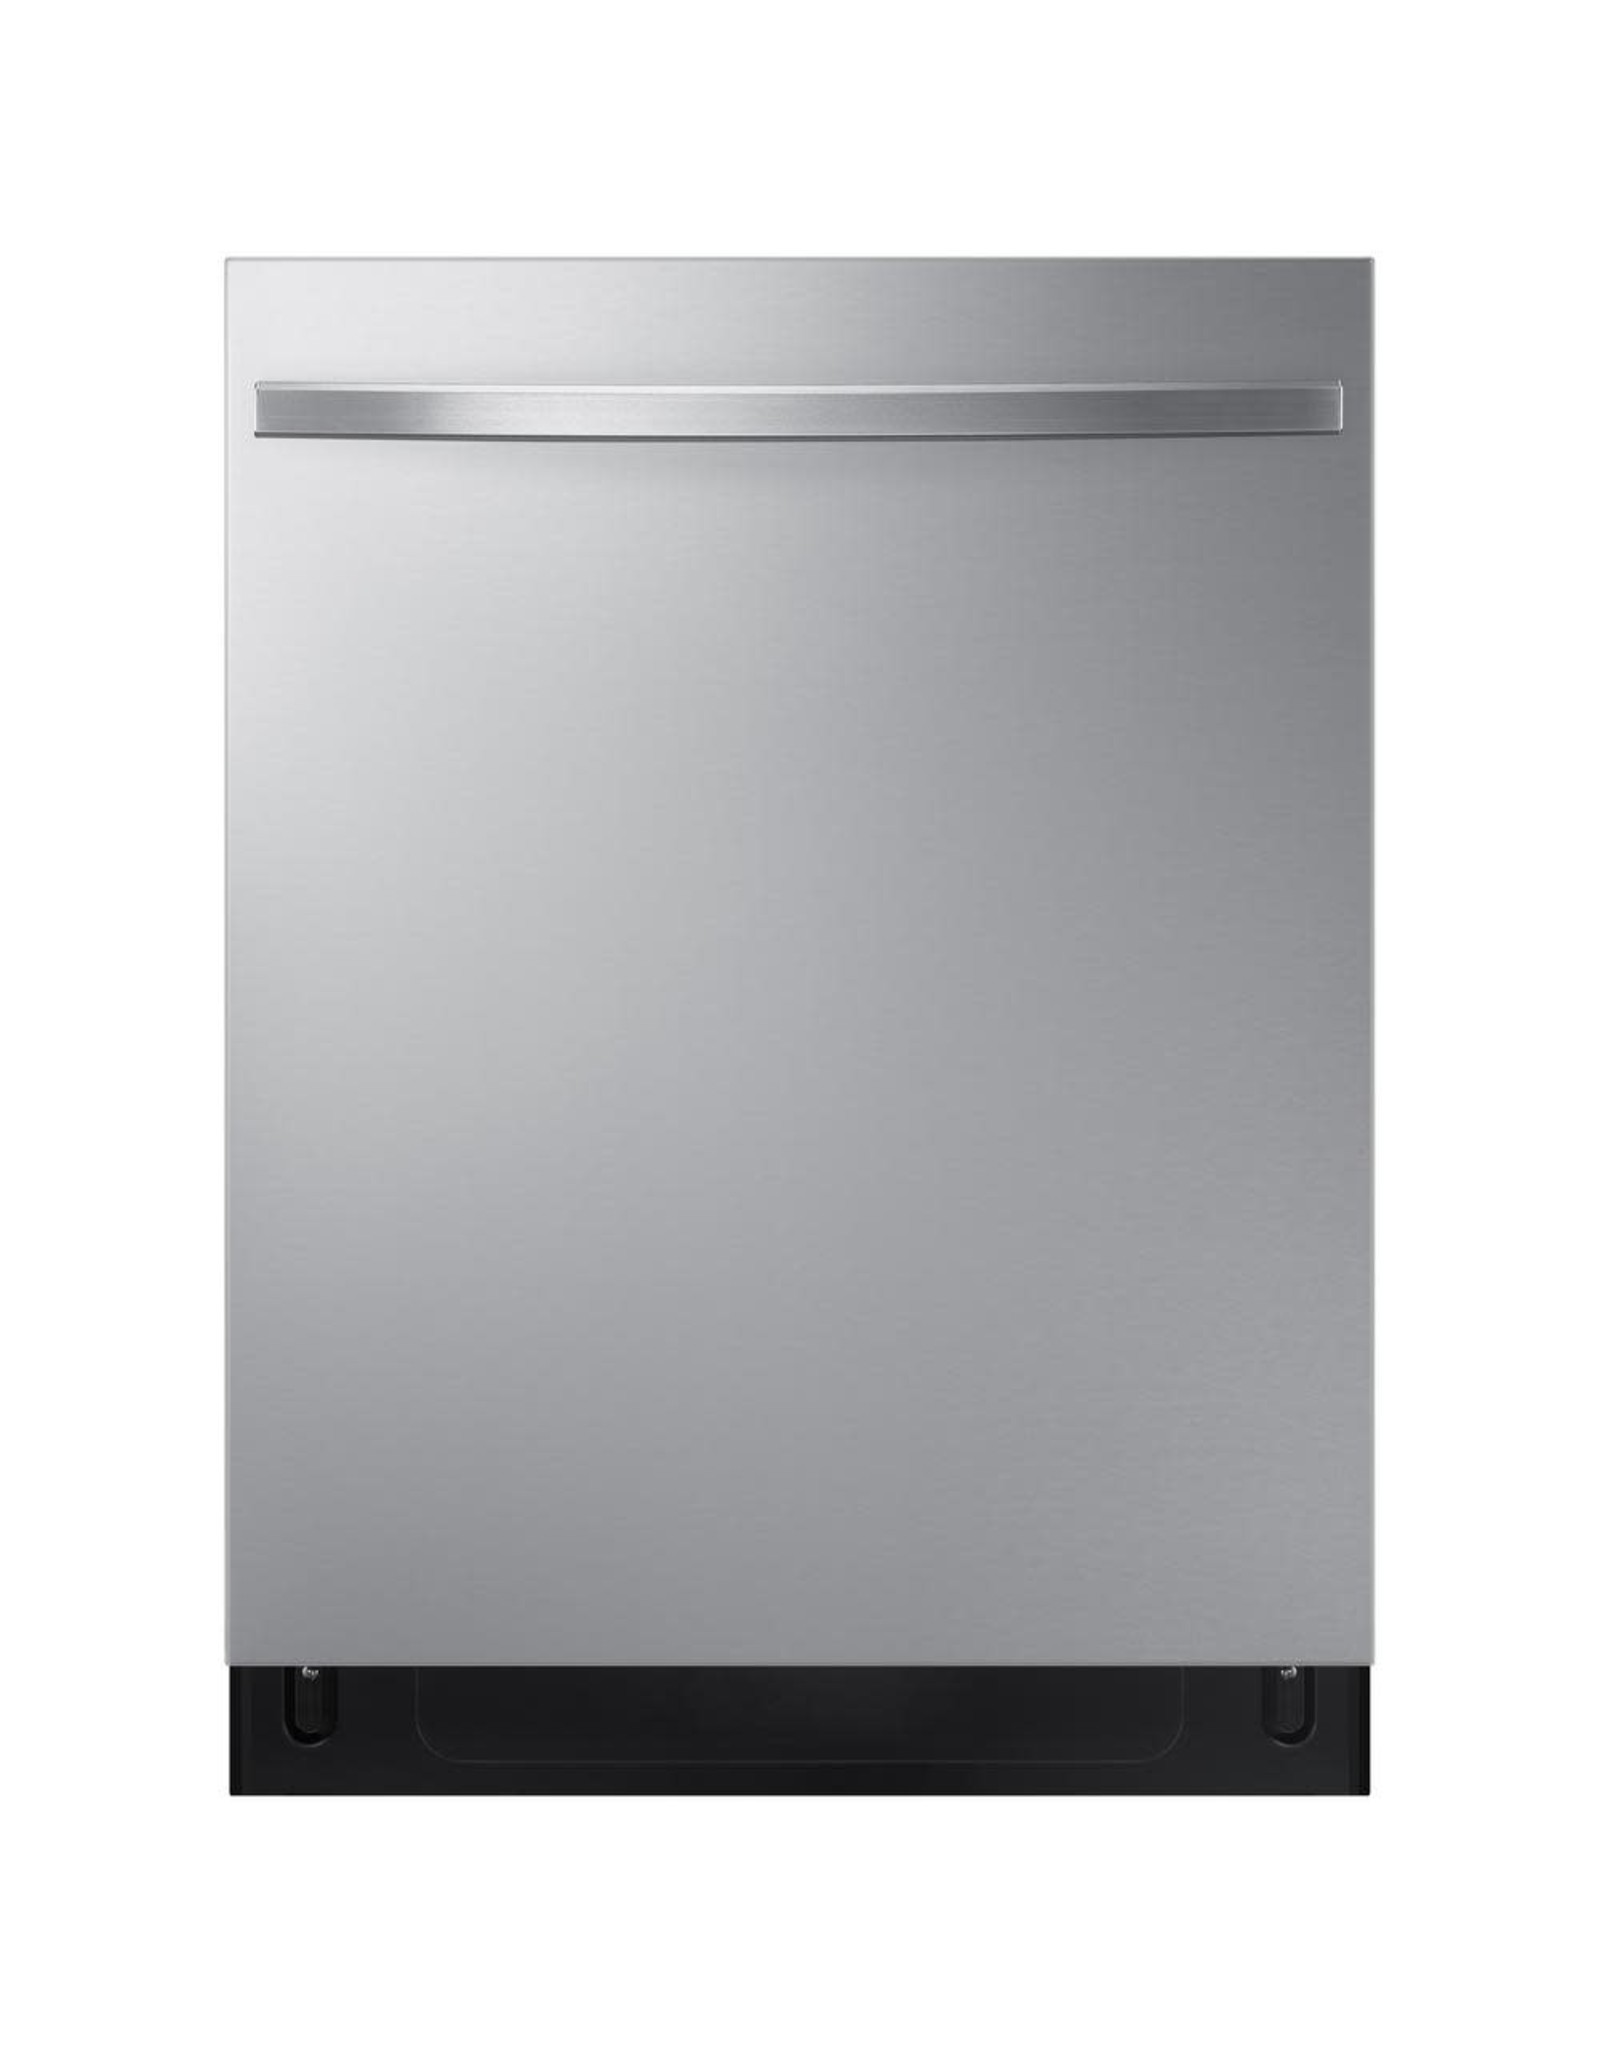 DW80R5061US 24 in. Top Control Storm Wash Tall Tub Dishwasher in Fingerprint Resistant Stainless Steel with Auto Release Dry, 48 dBA